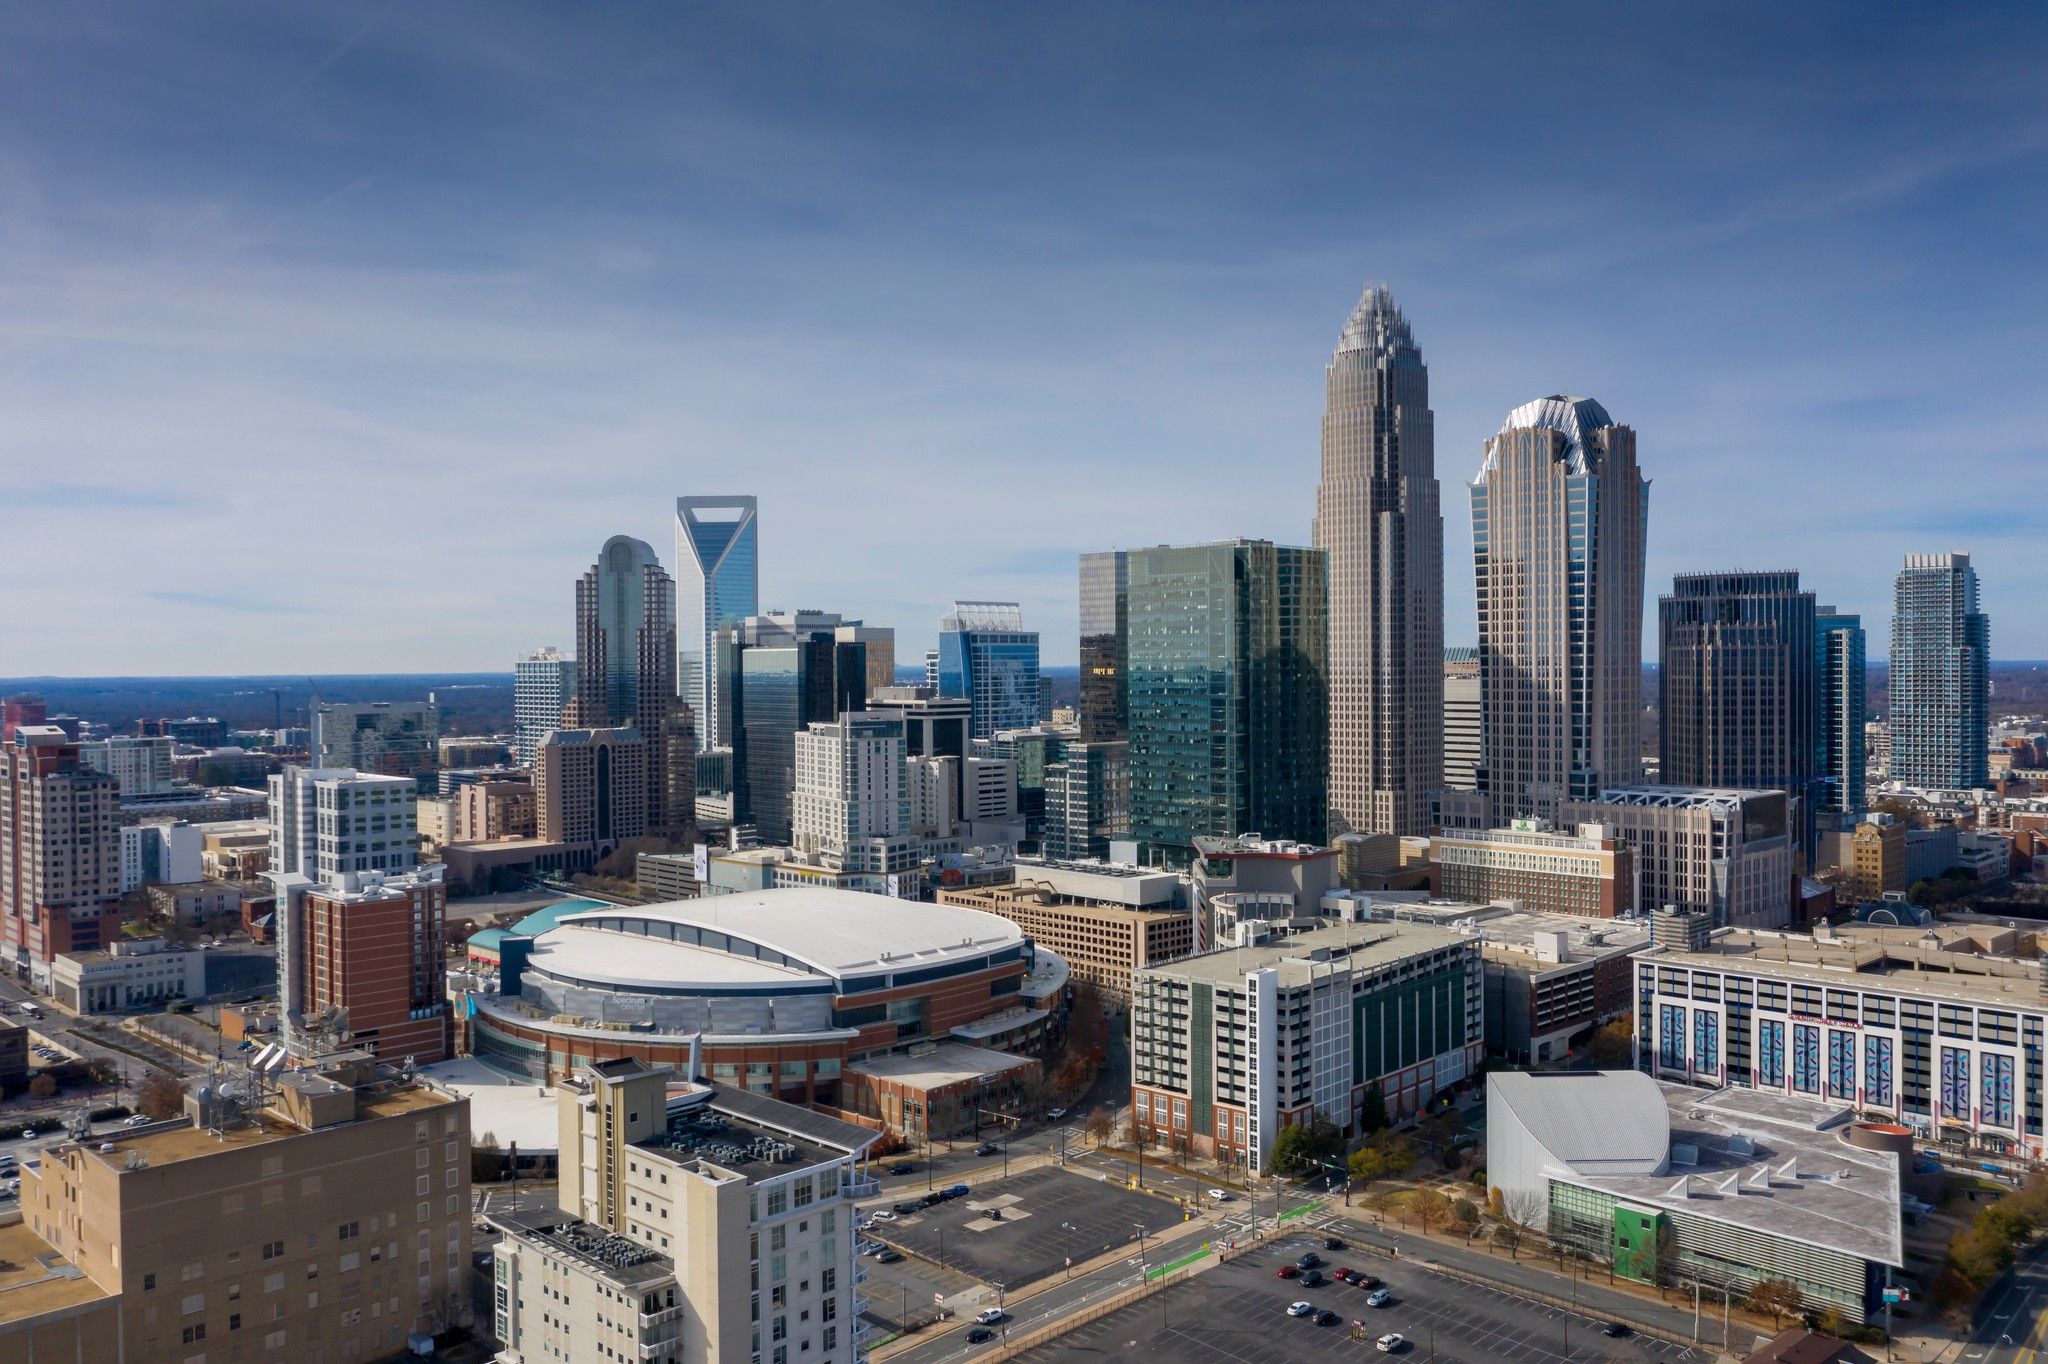 Aerial Views Of The City Of Charlotte, NC